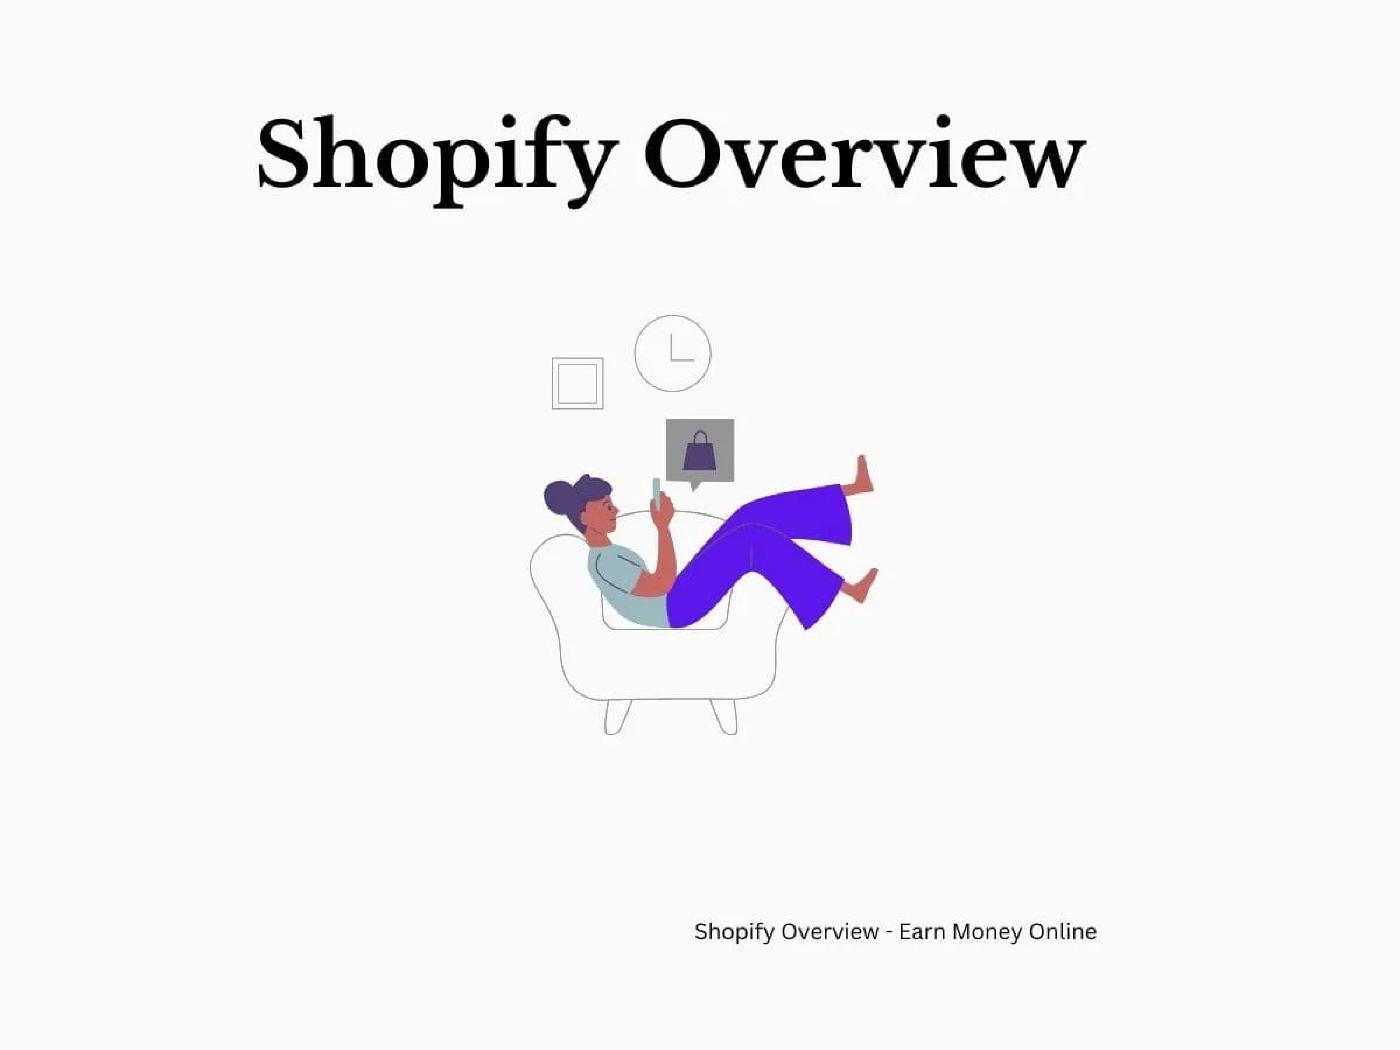 How to Sell on Shopify